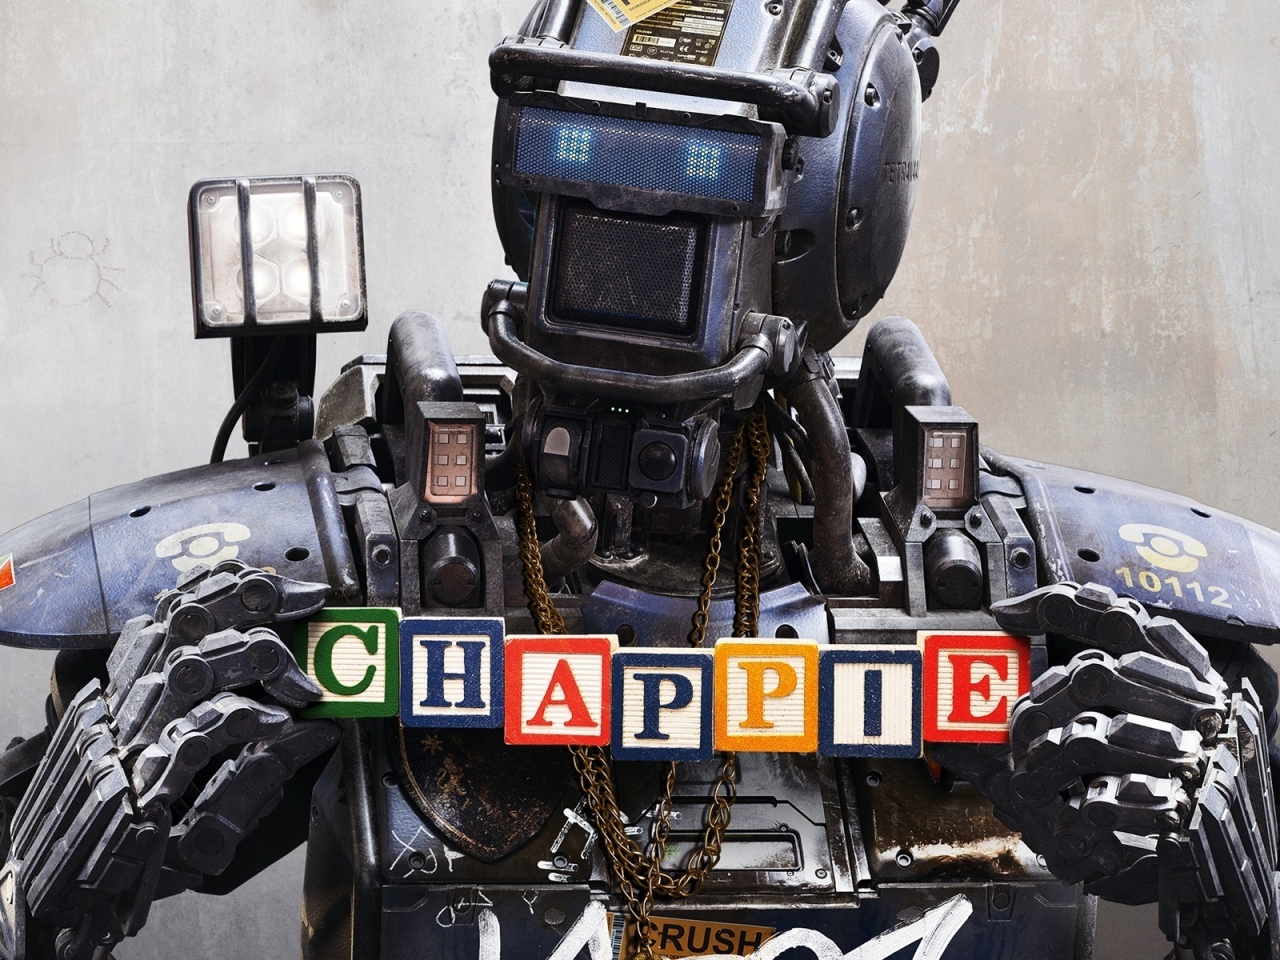 Chappie Robot for 1280 x 960 resolution